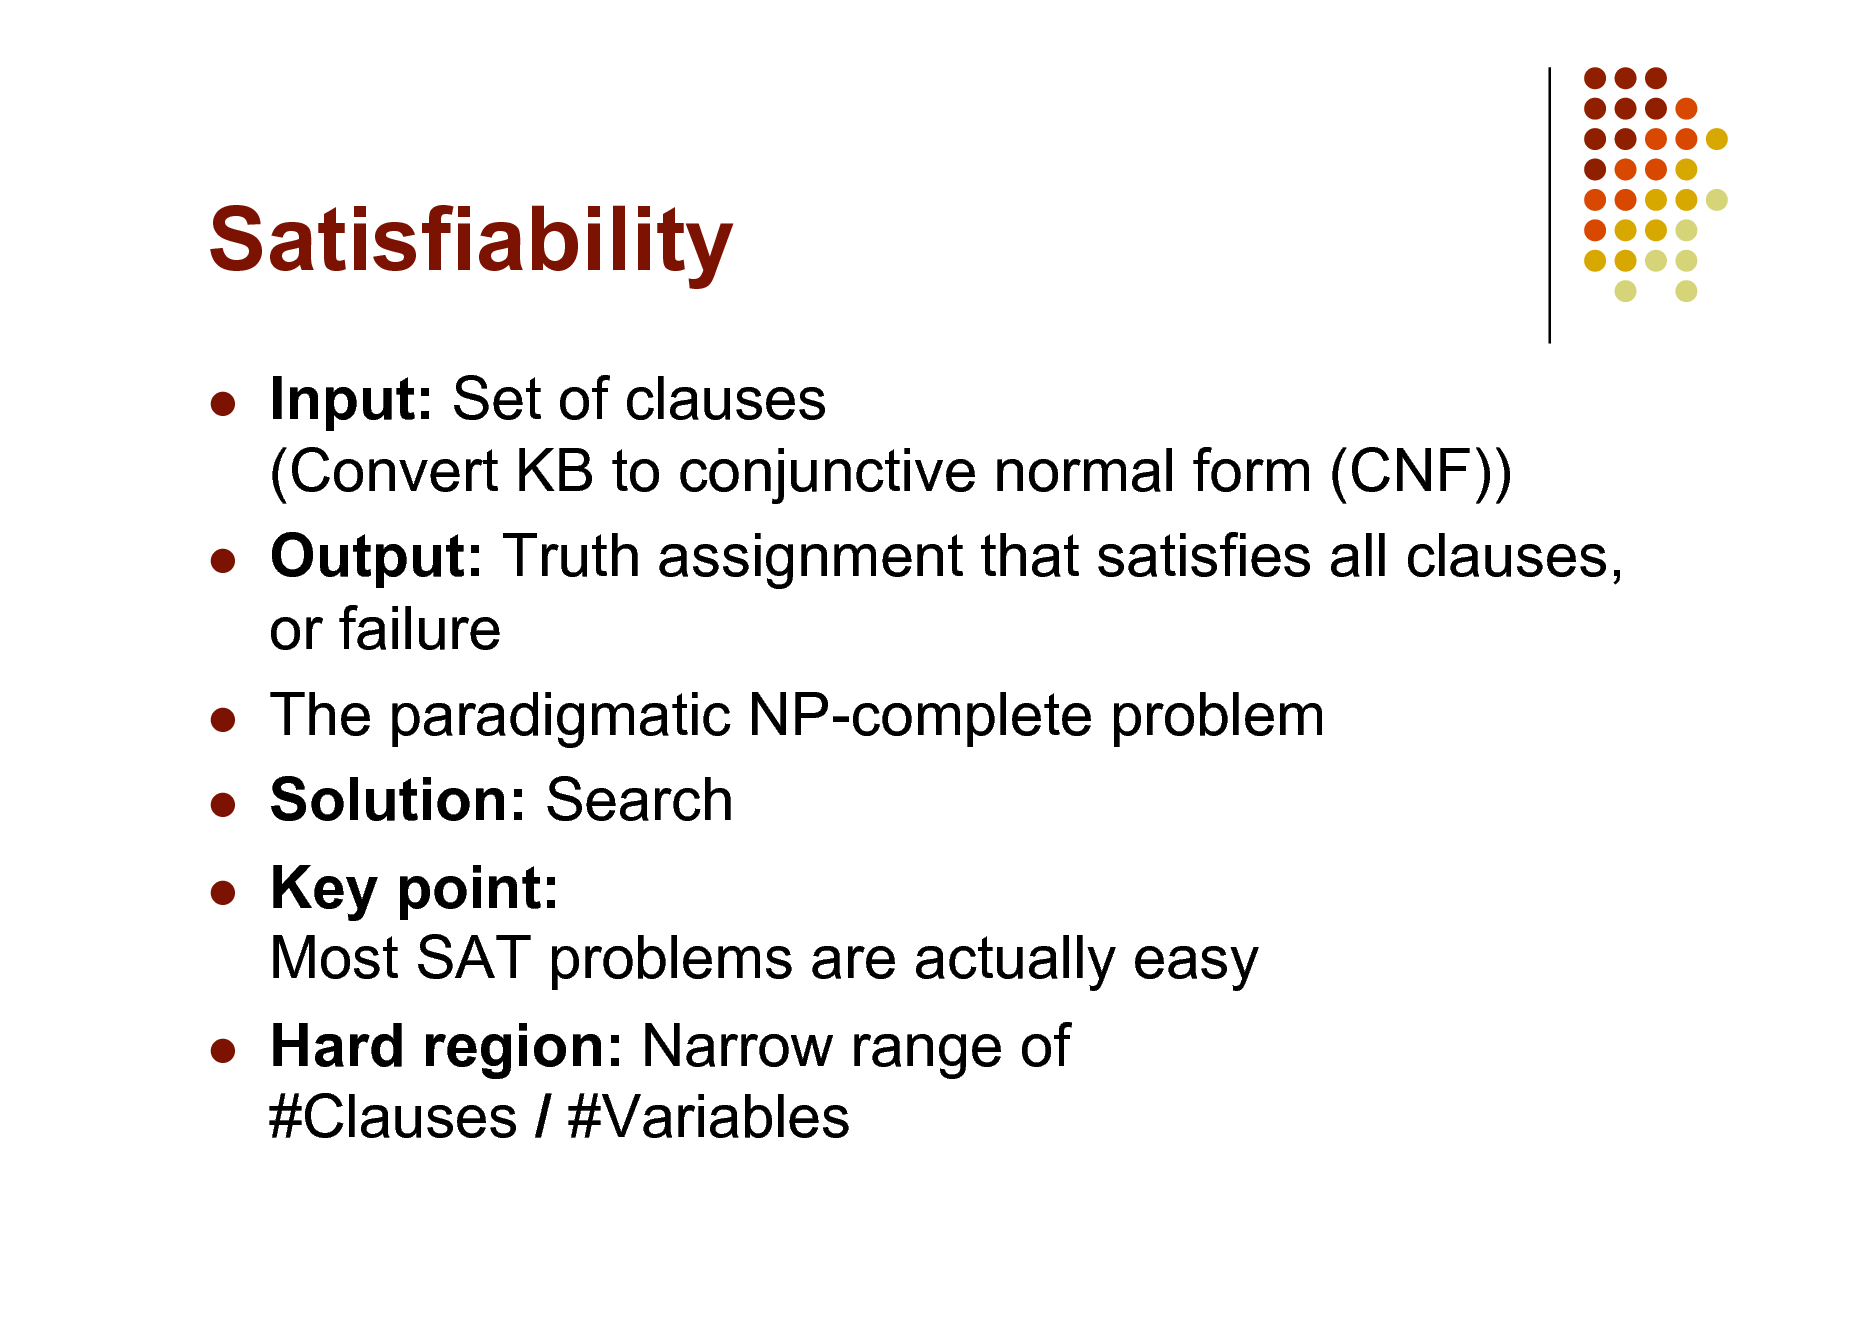 Slide: Satisfiability




  



Input: Set of clauses (Convert KB to conjunctive normal form (CNF)) Output: Truth assignment that satisfies all clauses, or failure The paradigmatic NP-complete problem Solution: Search Key point: Most SAT problems are actually easy Hard region: Narrow range of #Clauses / #Variables

